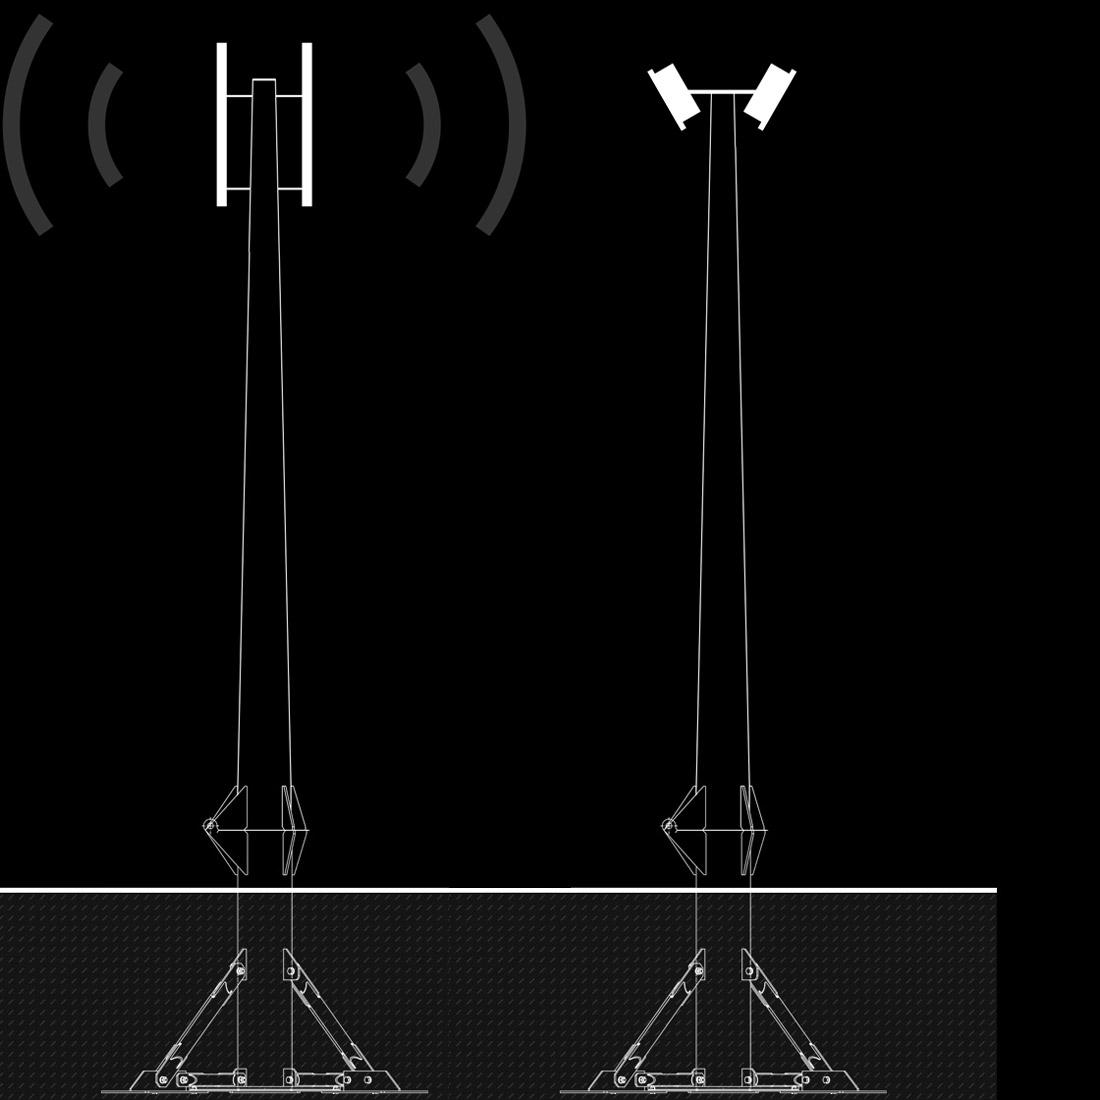 Pole and mast systems